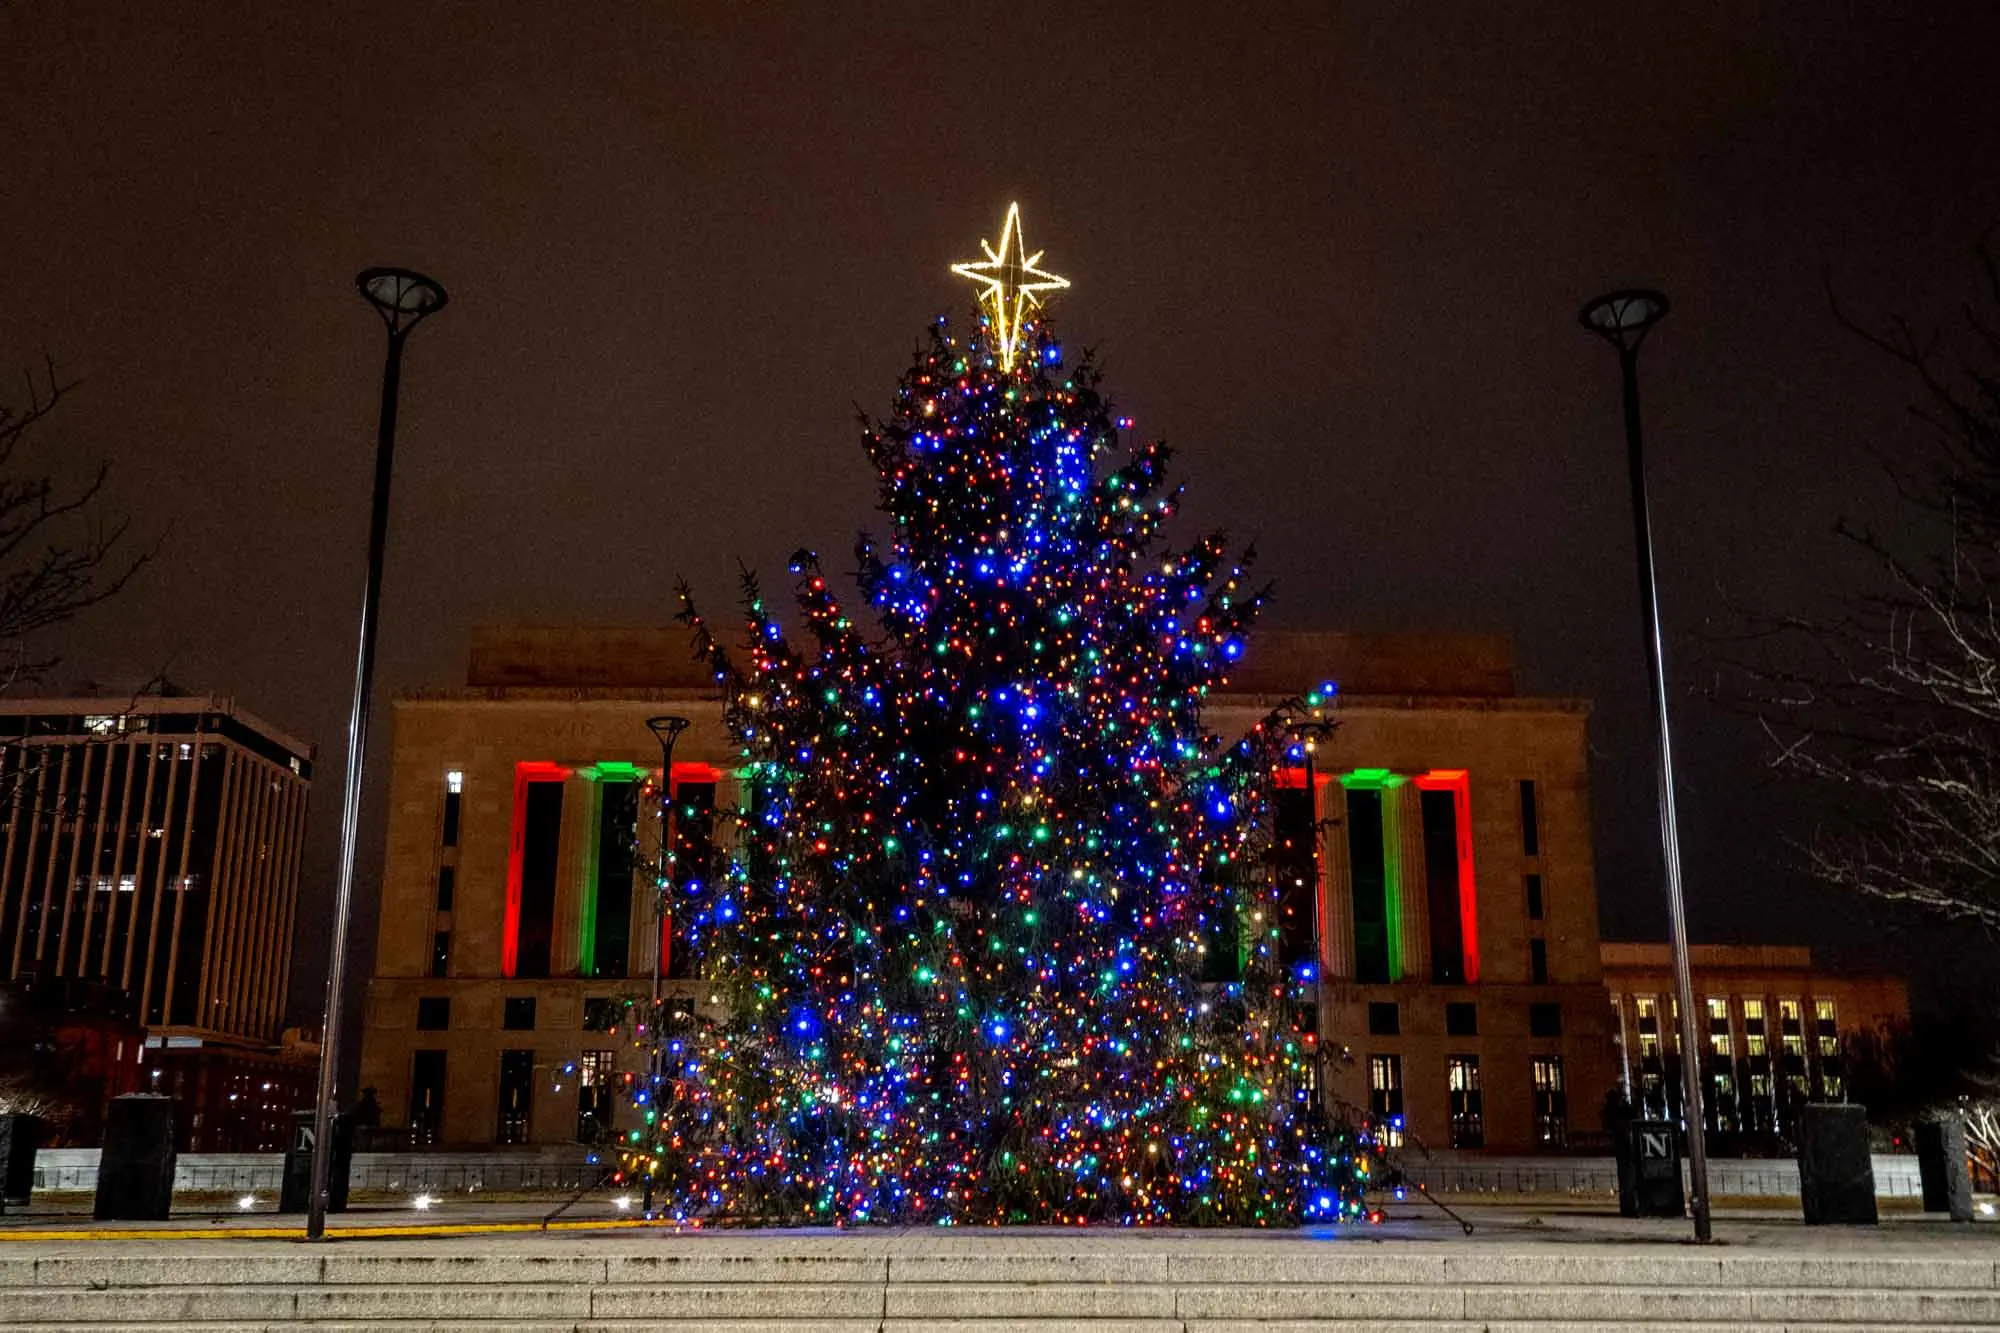 35-foot-tall Christmas tree lit up at night in a city square